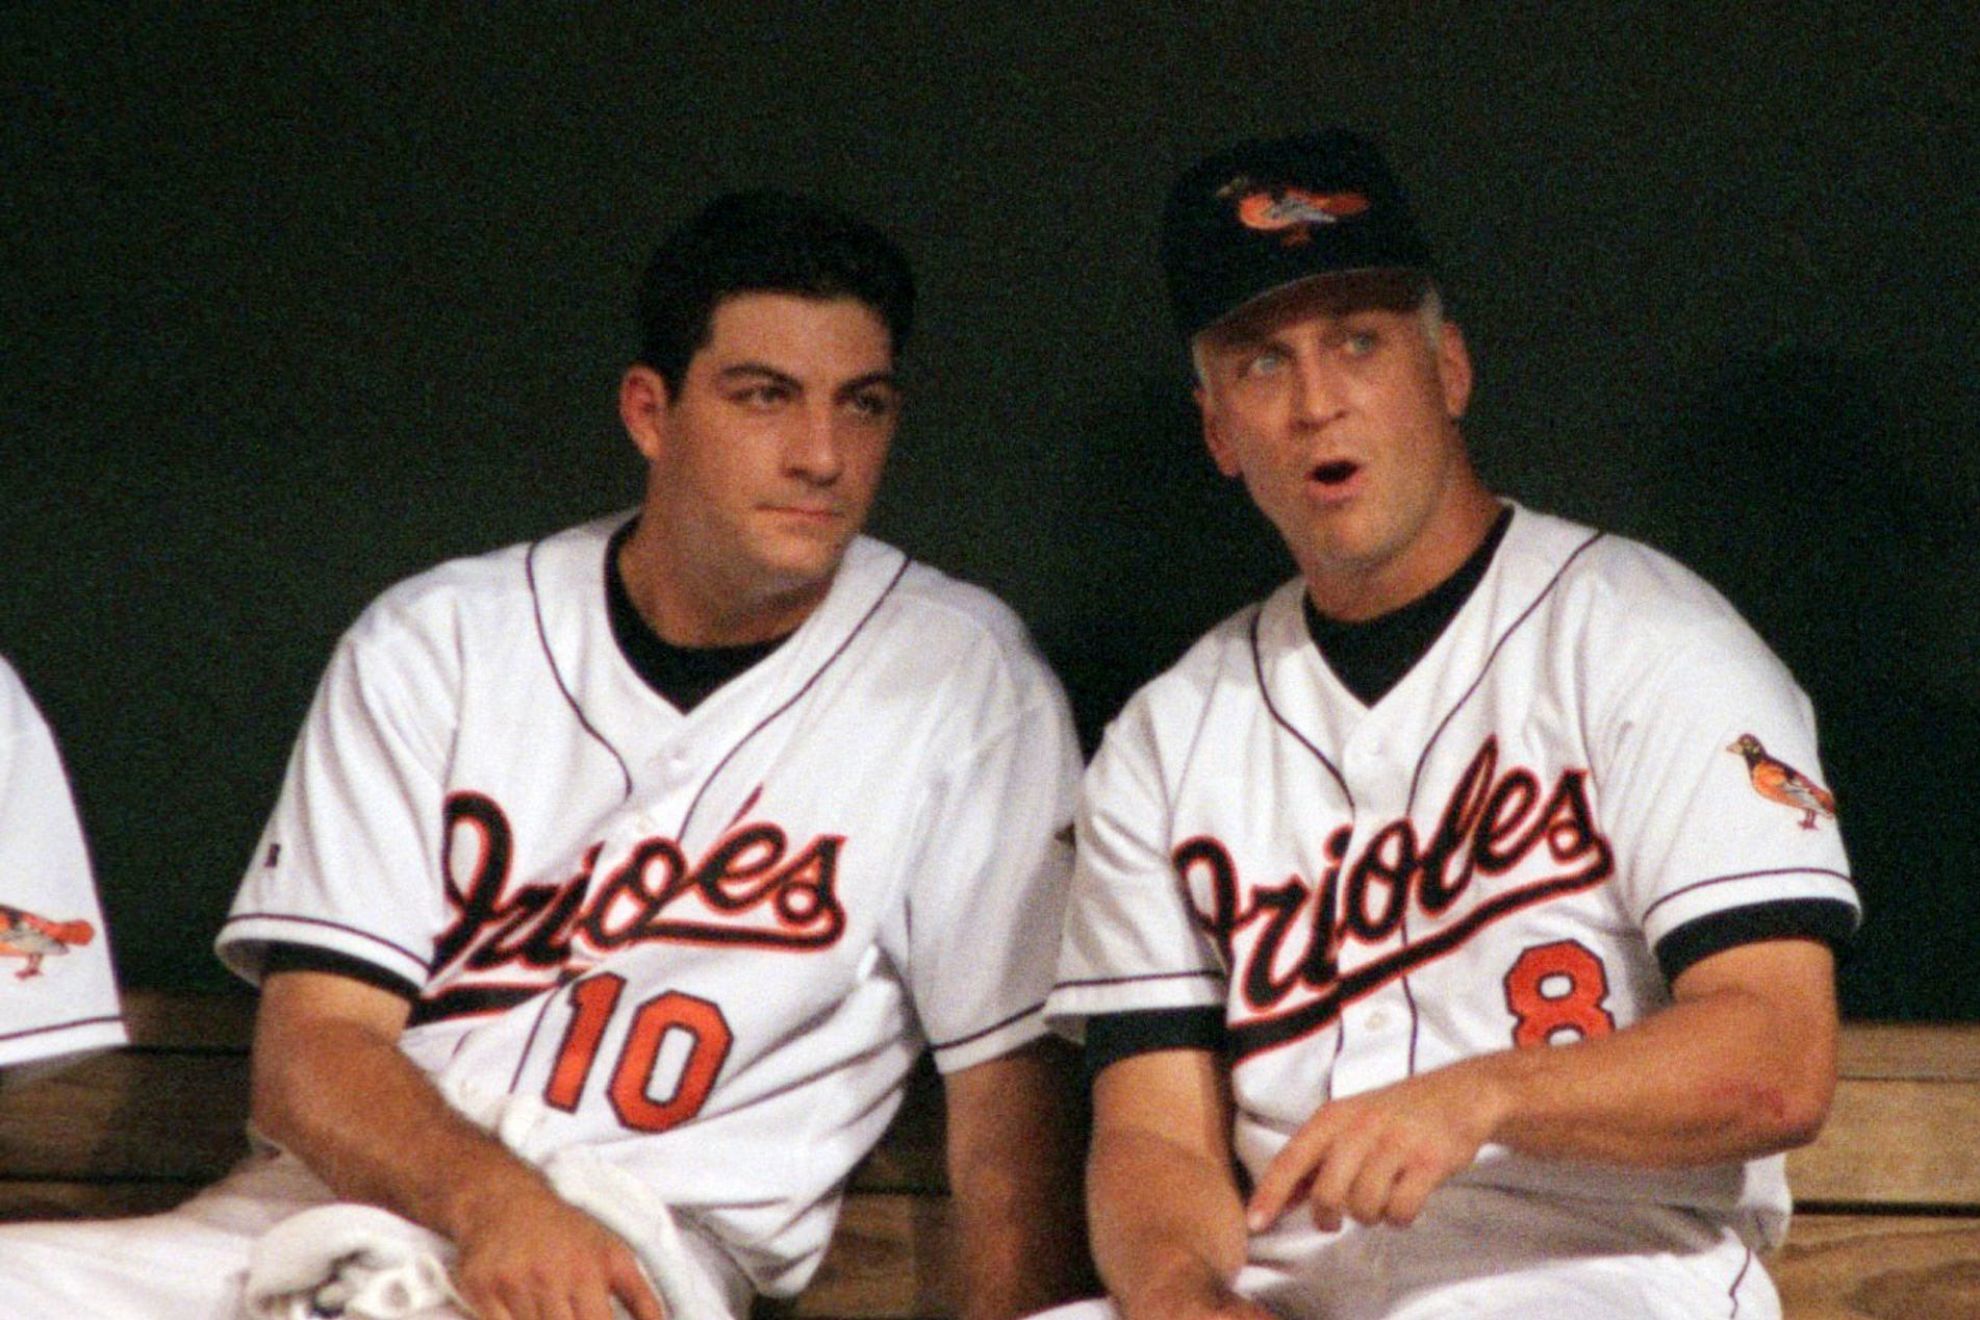 Ryan Minor (left) chats with Cal Ripken Jr. when both were members of the Baltimore Orioles MLB franchise.